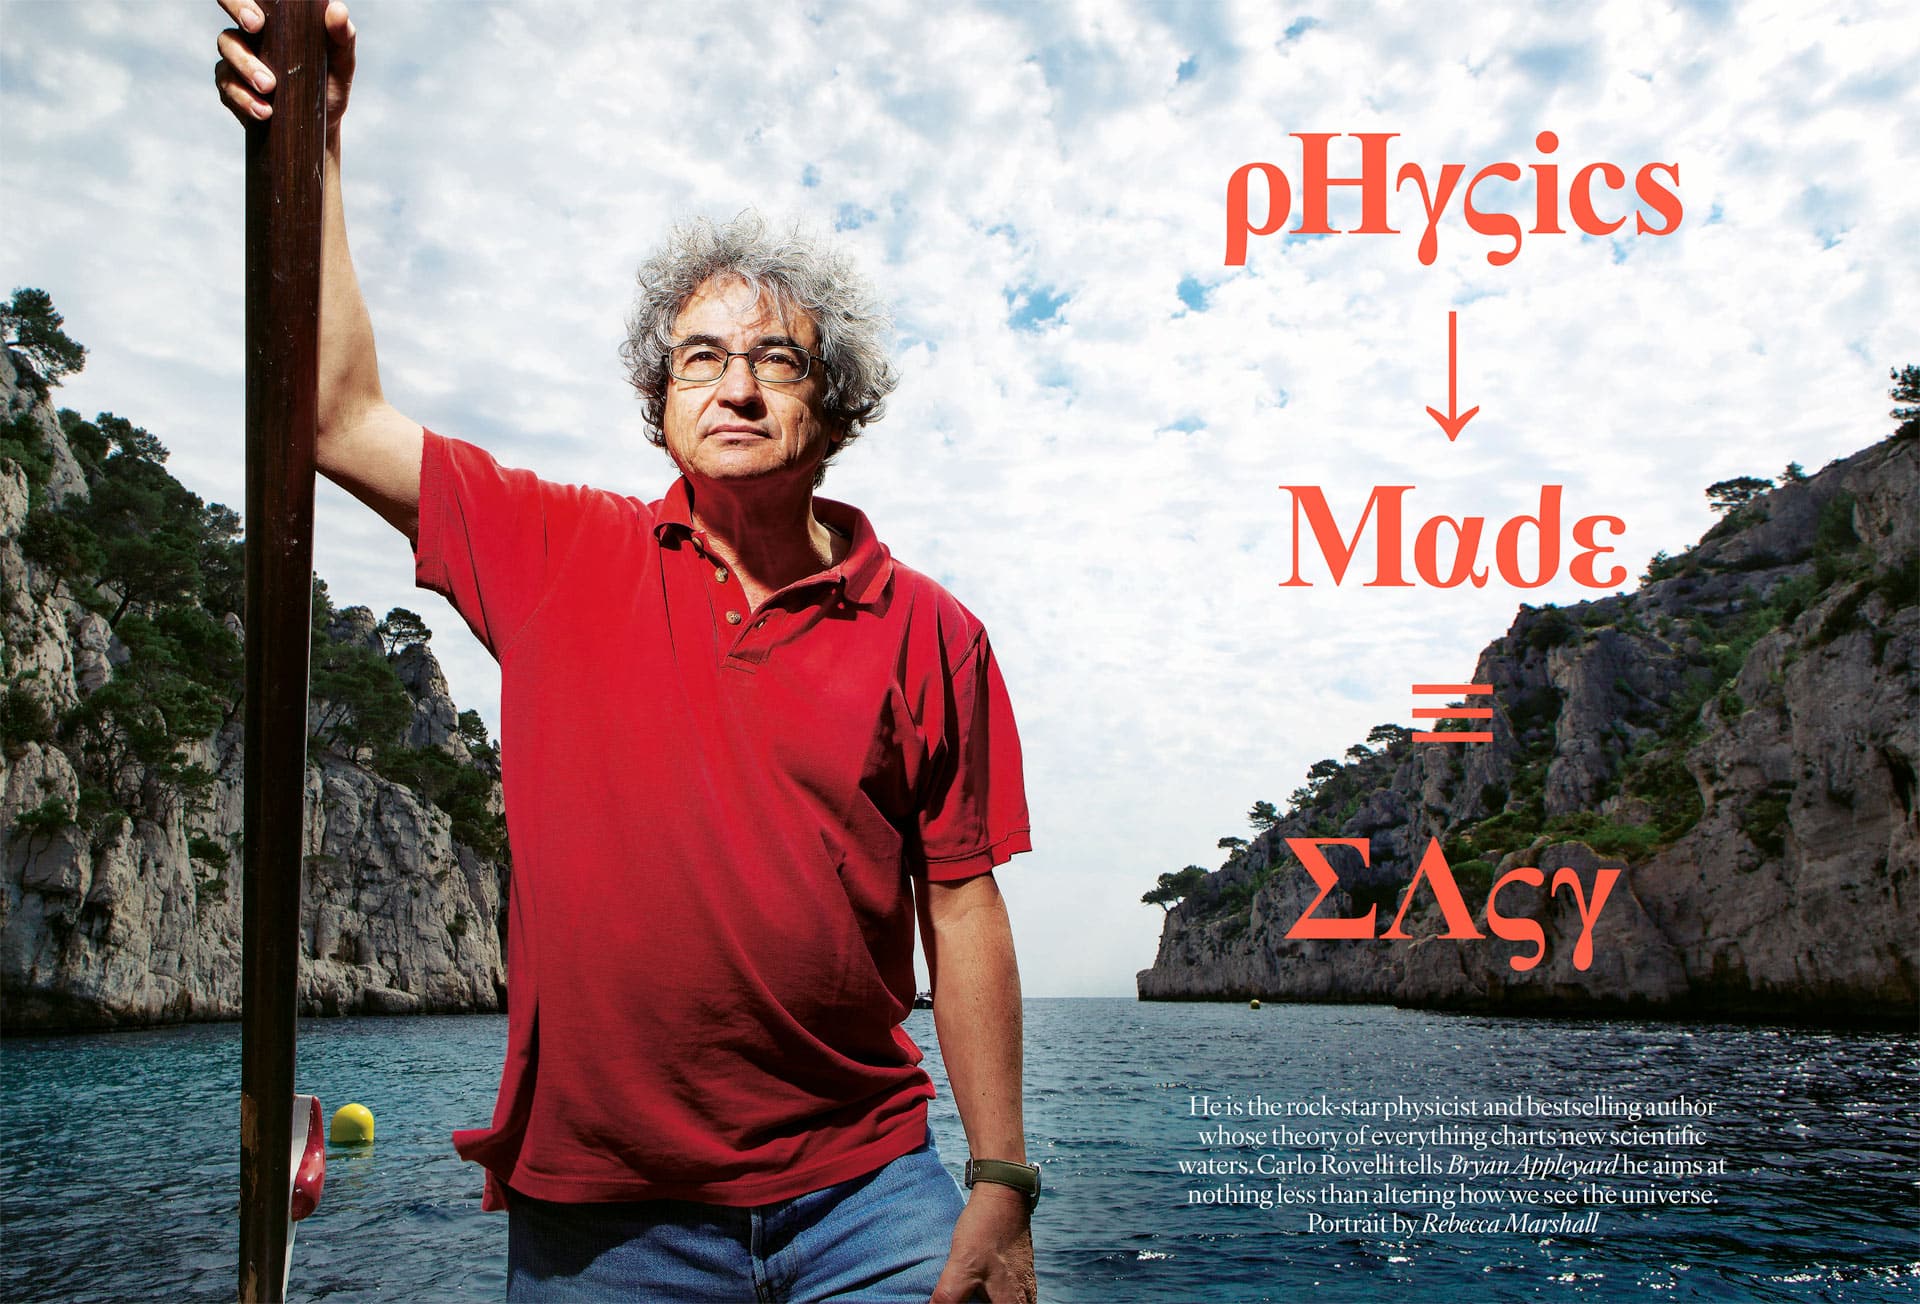 Double page spread showing a man in a red shirt standing in a boat